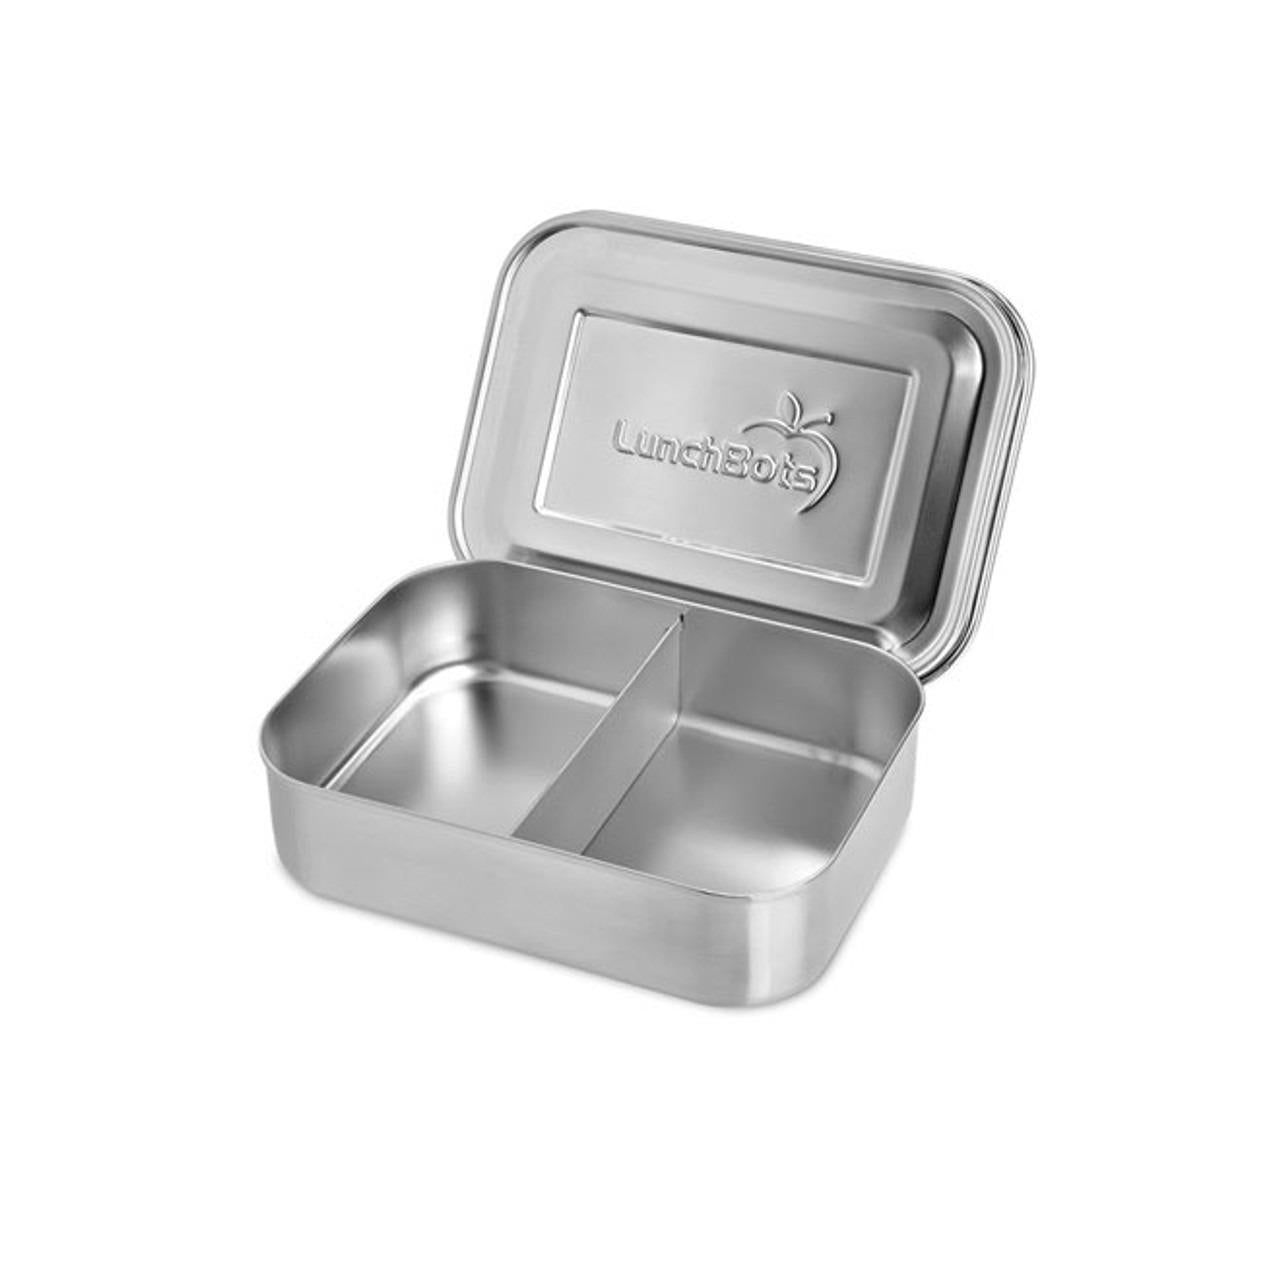 LunchBots Small 2 Compartment Snack Packer